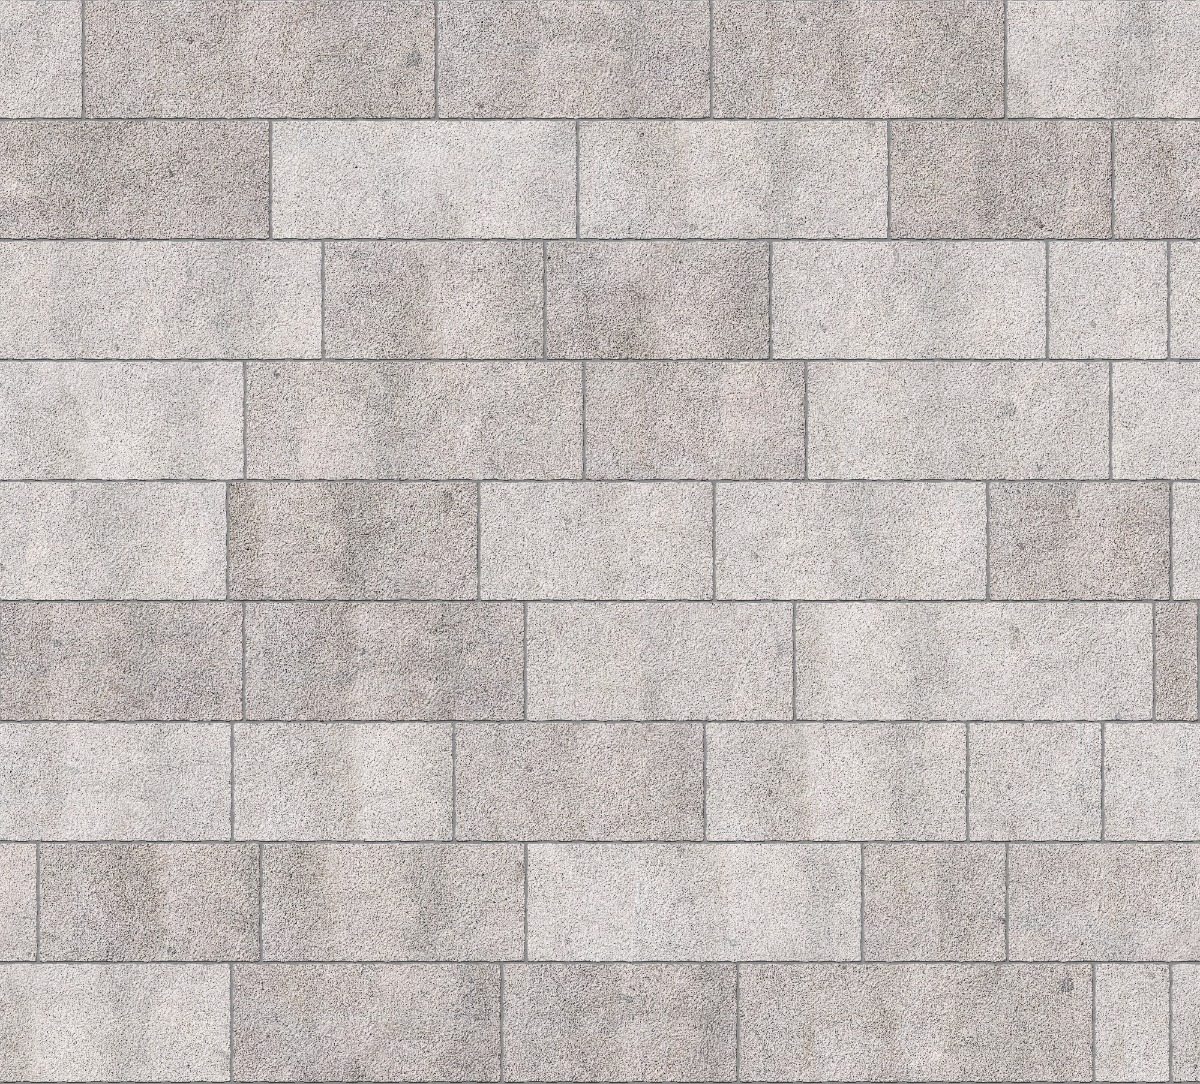 A seamless stone texture with granite blocks arranged in a Ashlar pattern